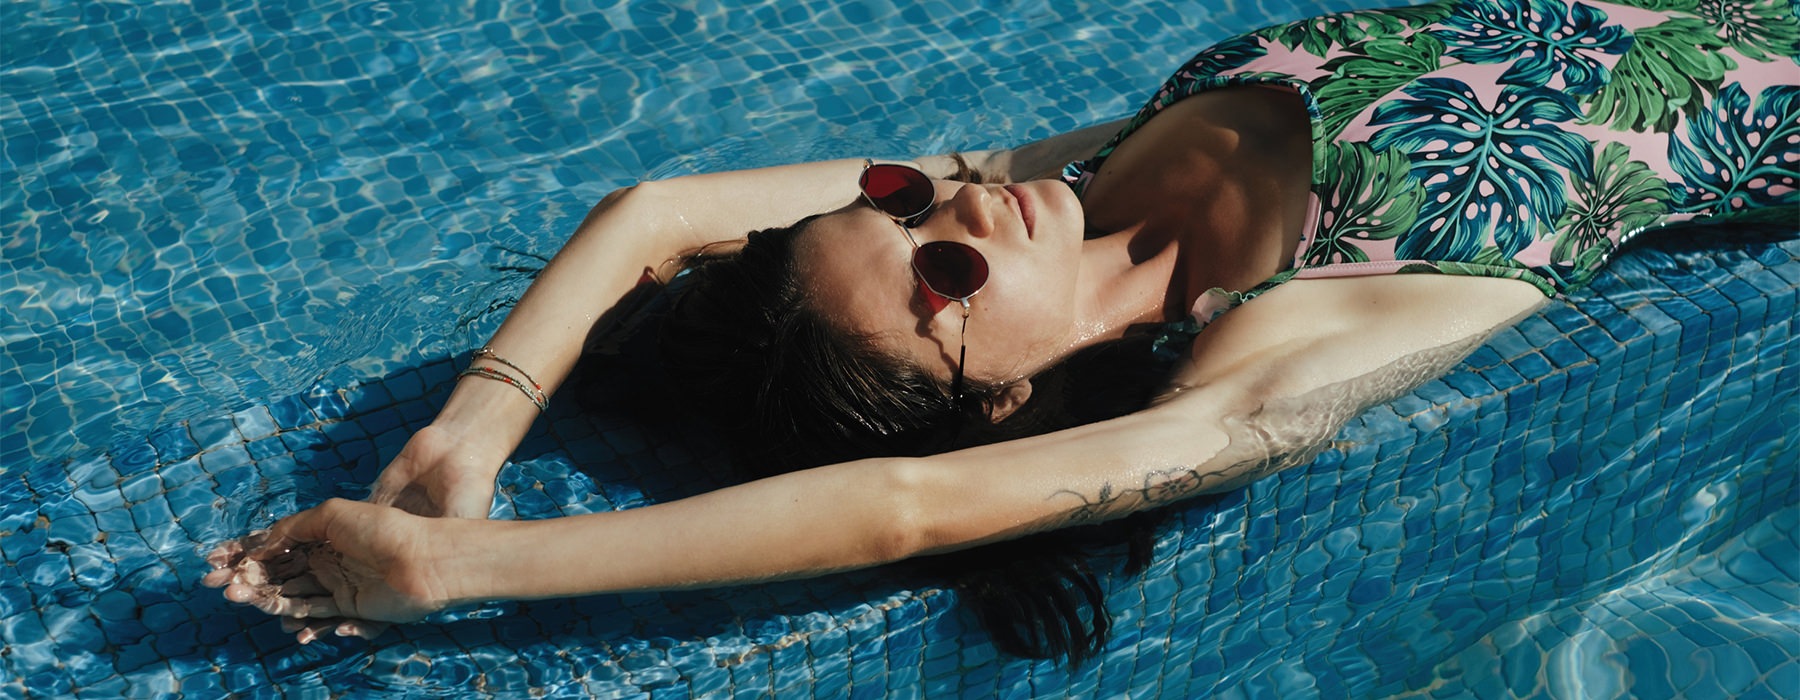 Lifestyle photo of a woman swimming in the pool